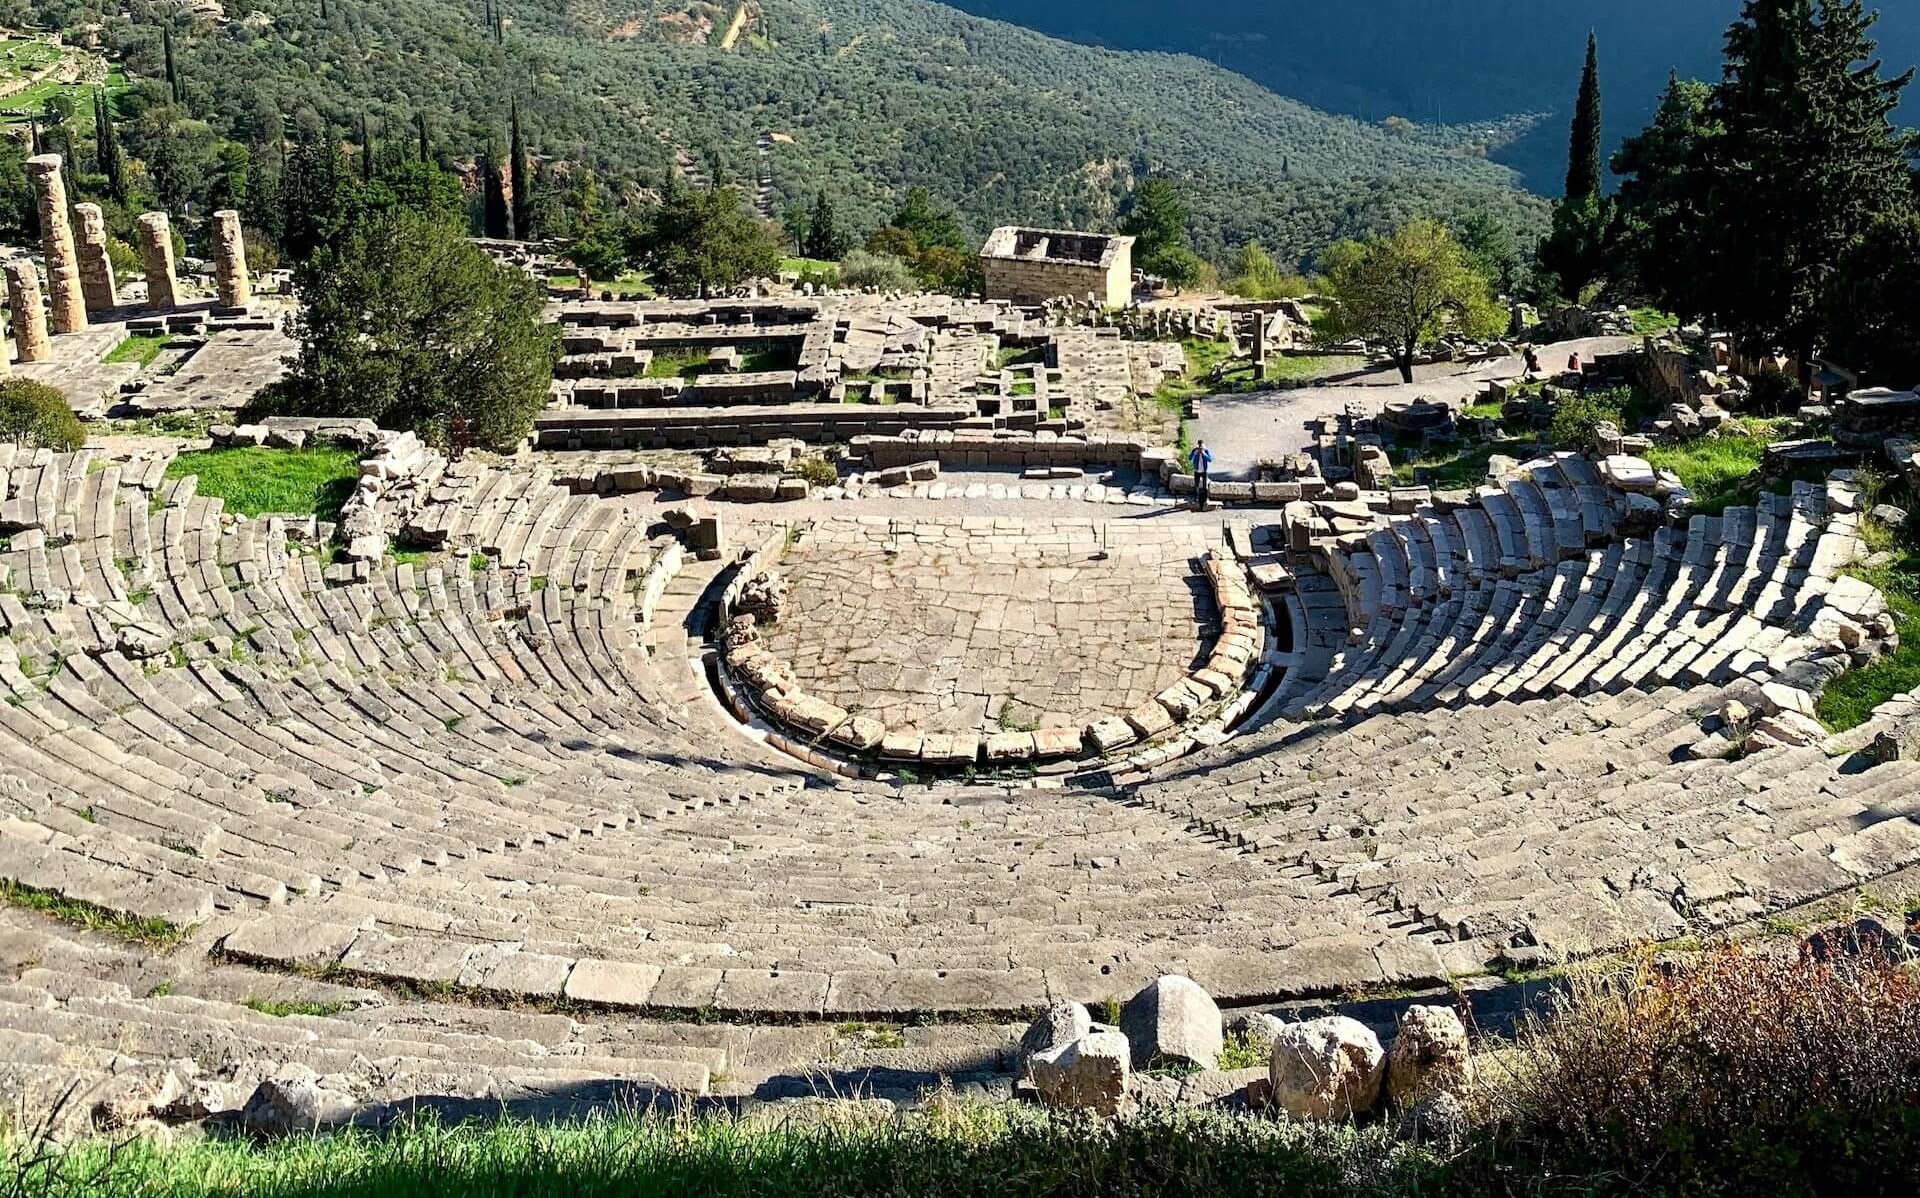 Epidaurus Theater, a masterpiece of ancient architecture, renowned for its incredible acoustics and grandeur.